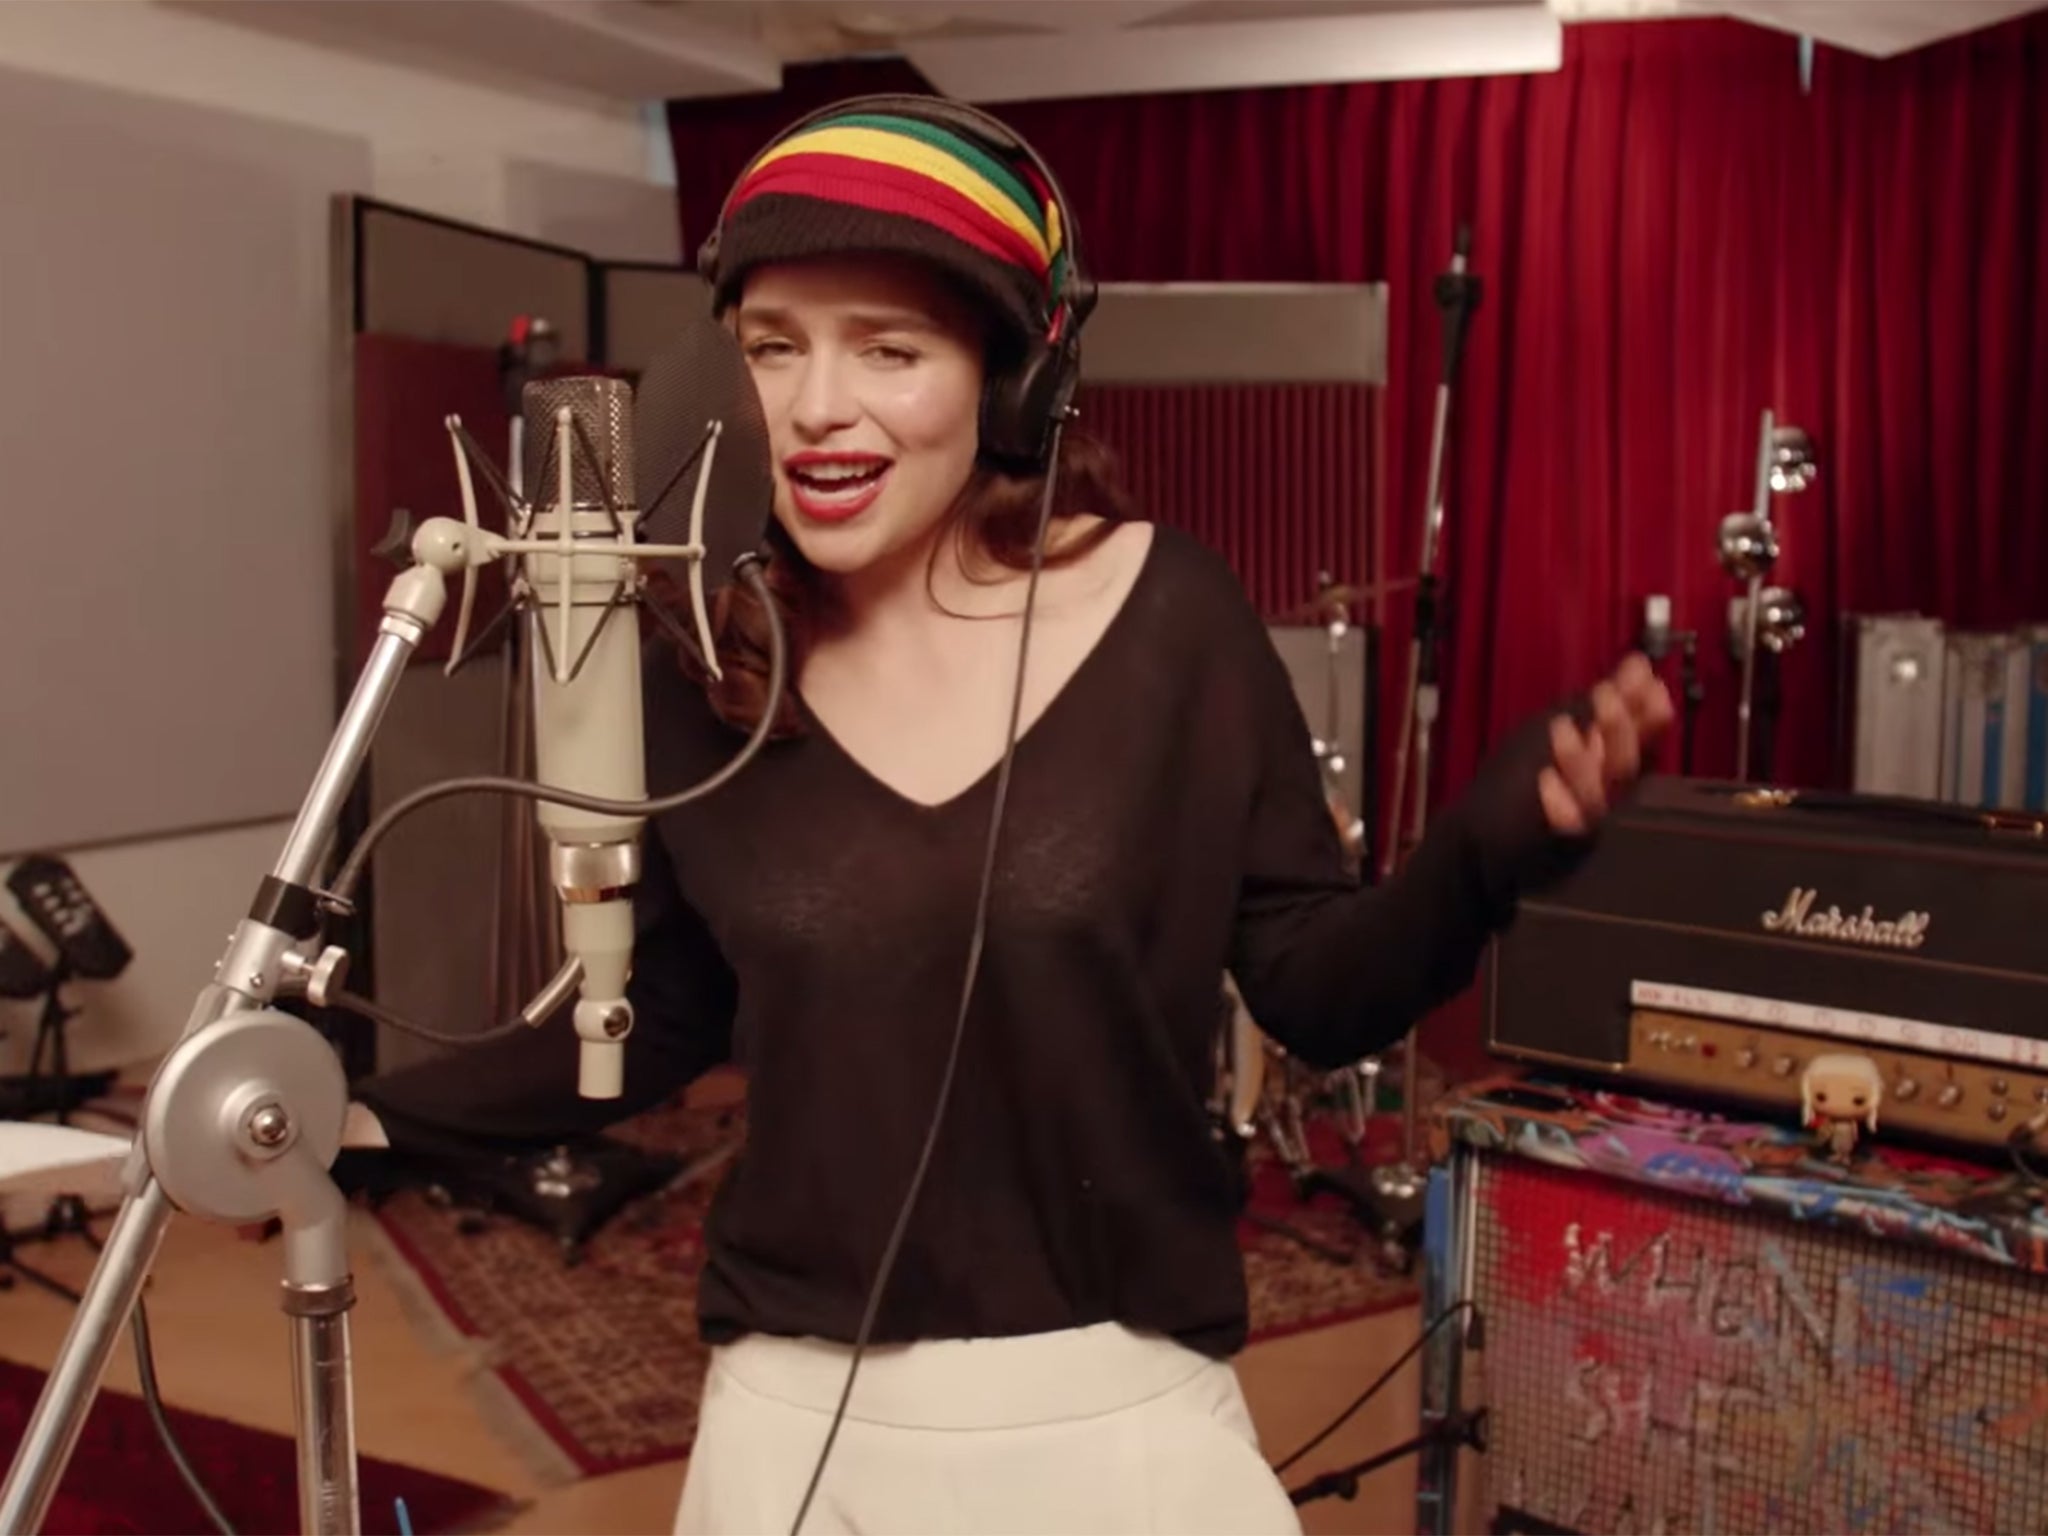 Emilia Clarke goes full Rastafarian as part of Coldplay's Game of Thrones musical